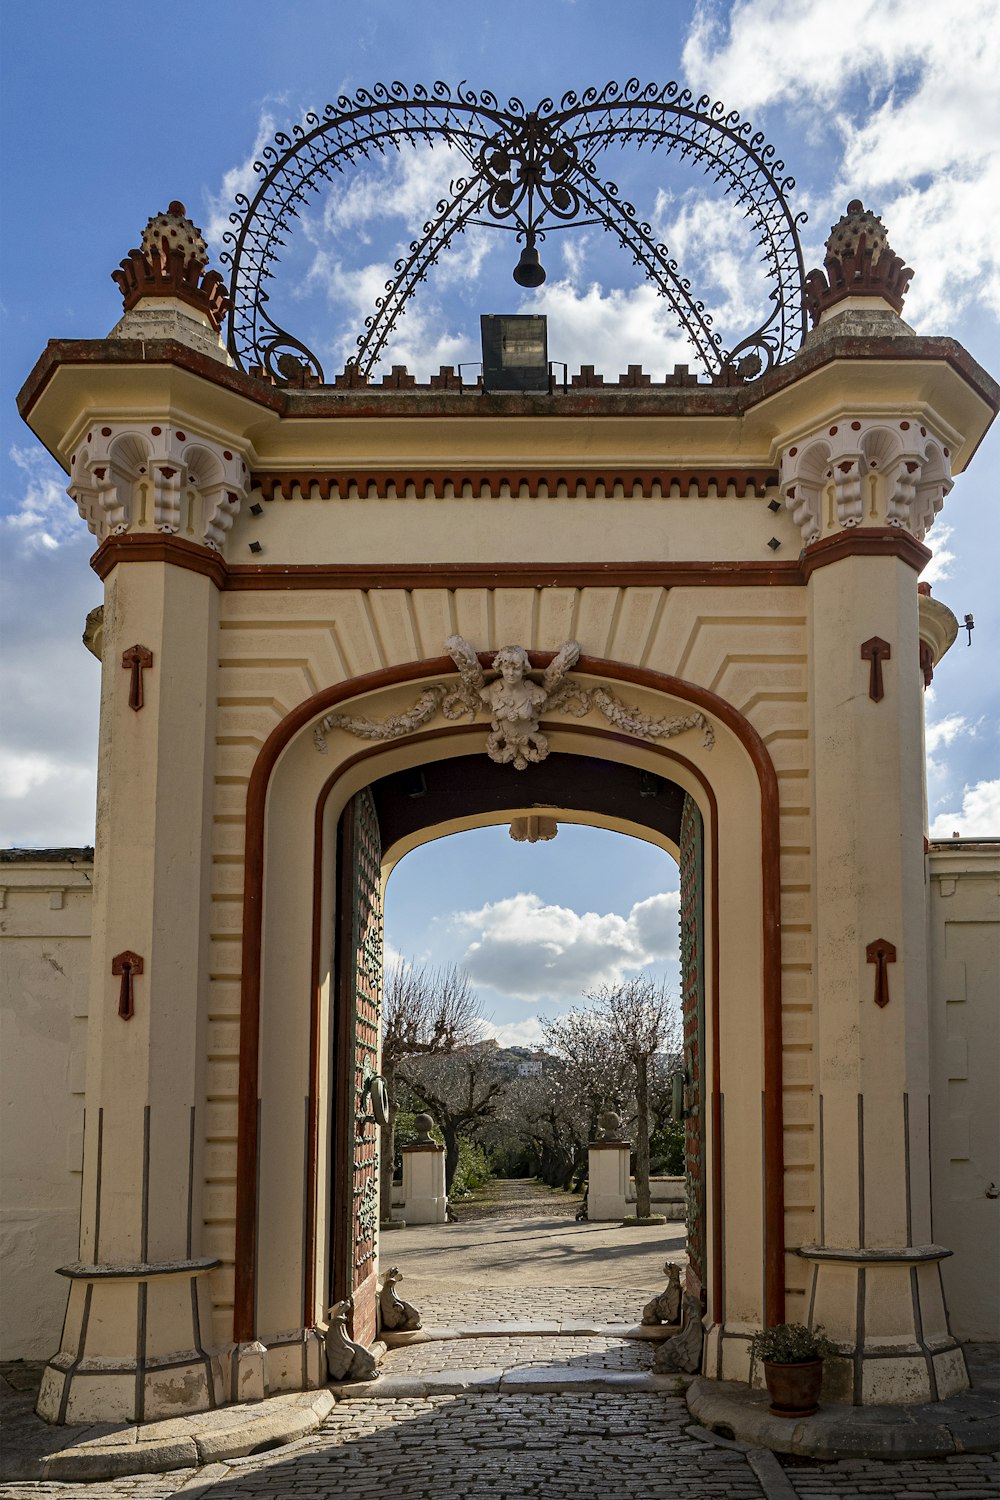 a gate with a clock on top of it